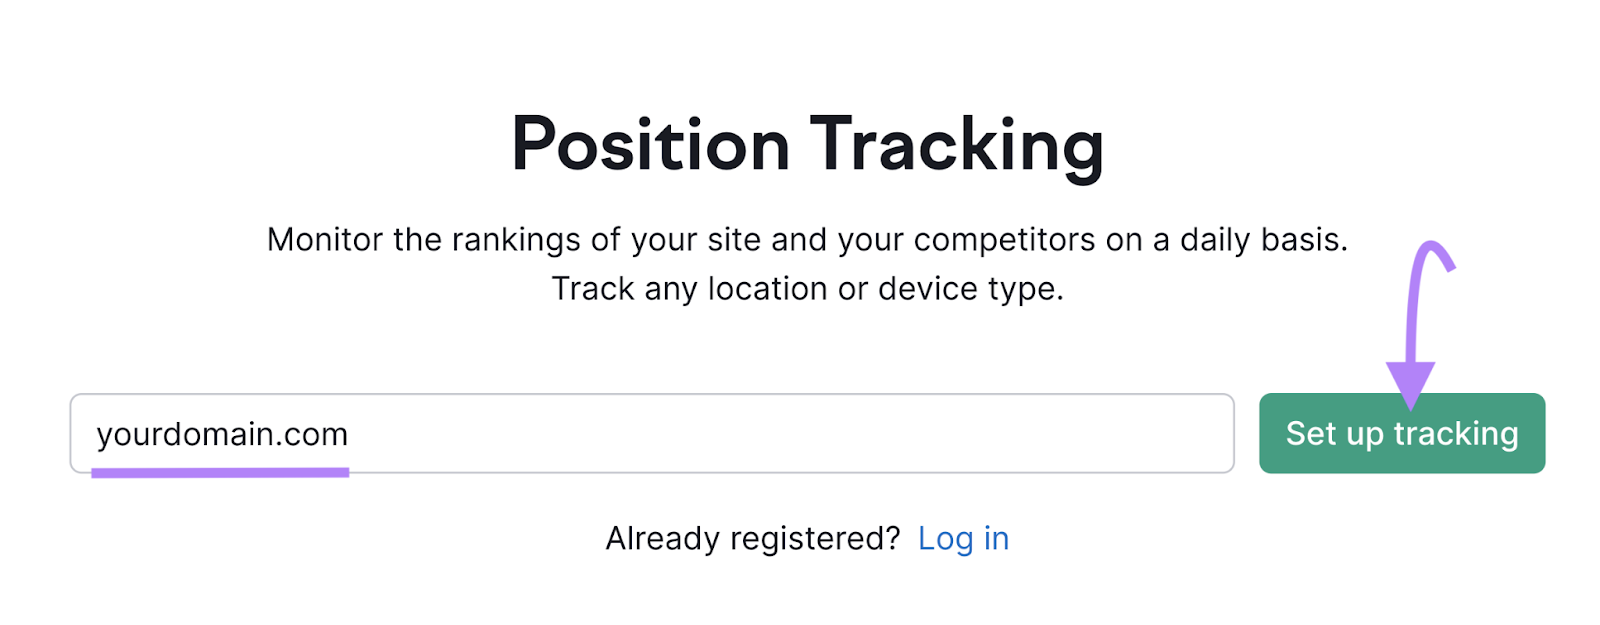 enter your domain into position tracking tool start